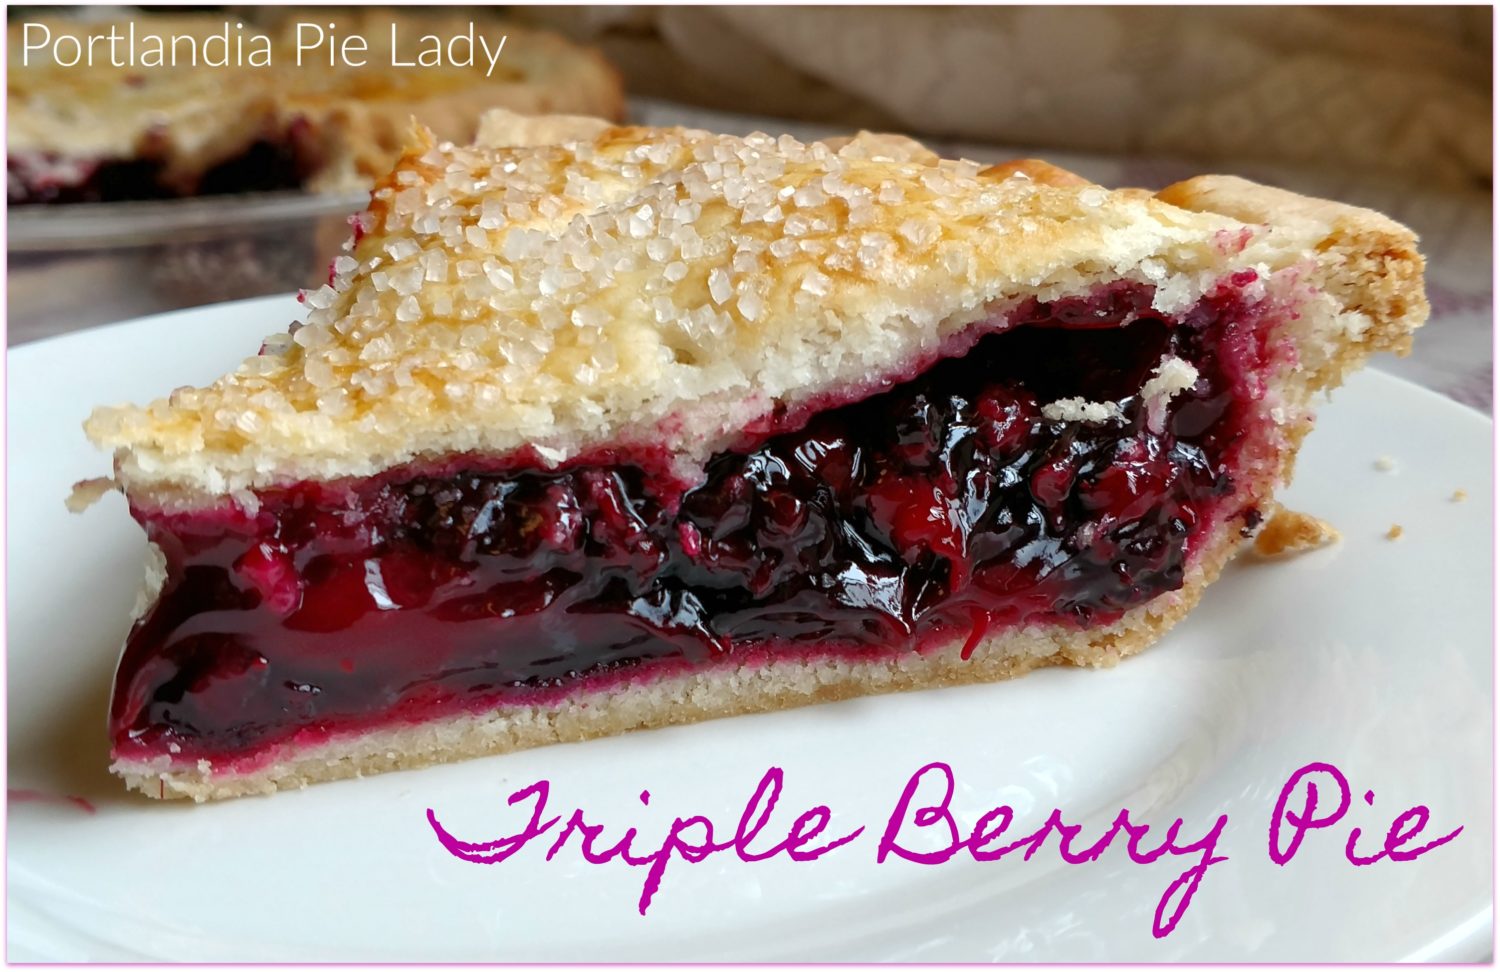 Triple Berry Pie captures that fresh-picked berry taste, perfectly baked filling in an ultra flaky crust; no watery runny berry pie ever again!